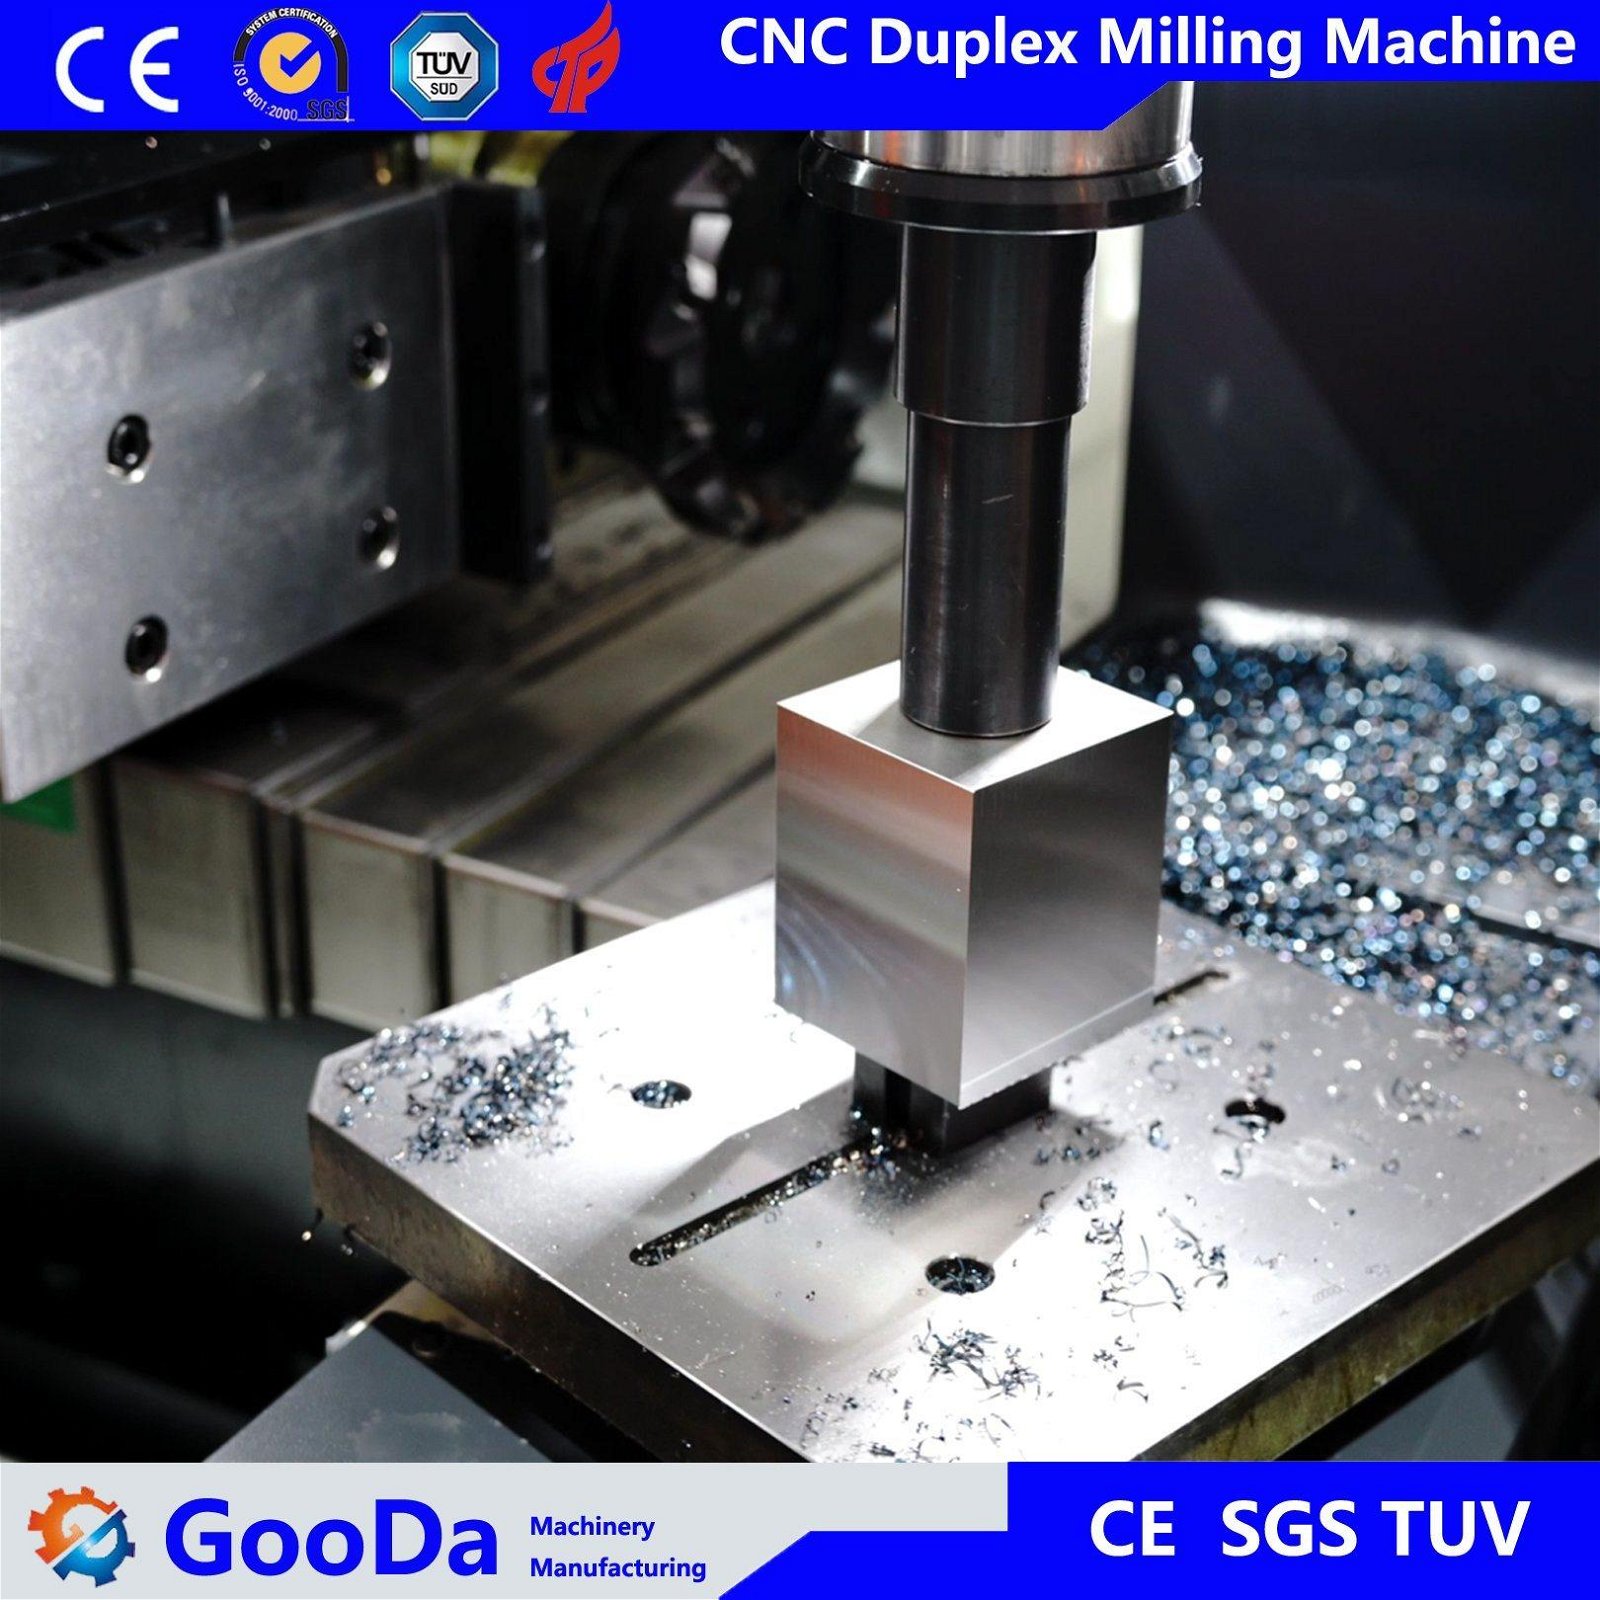 Twin-head CNC Milling Machine, mill four sides automatically CNC PLANER MILLING MACHINE